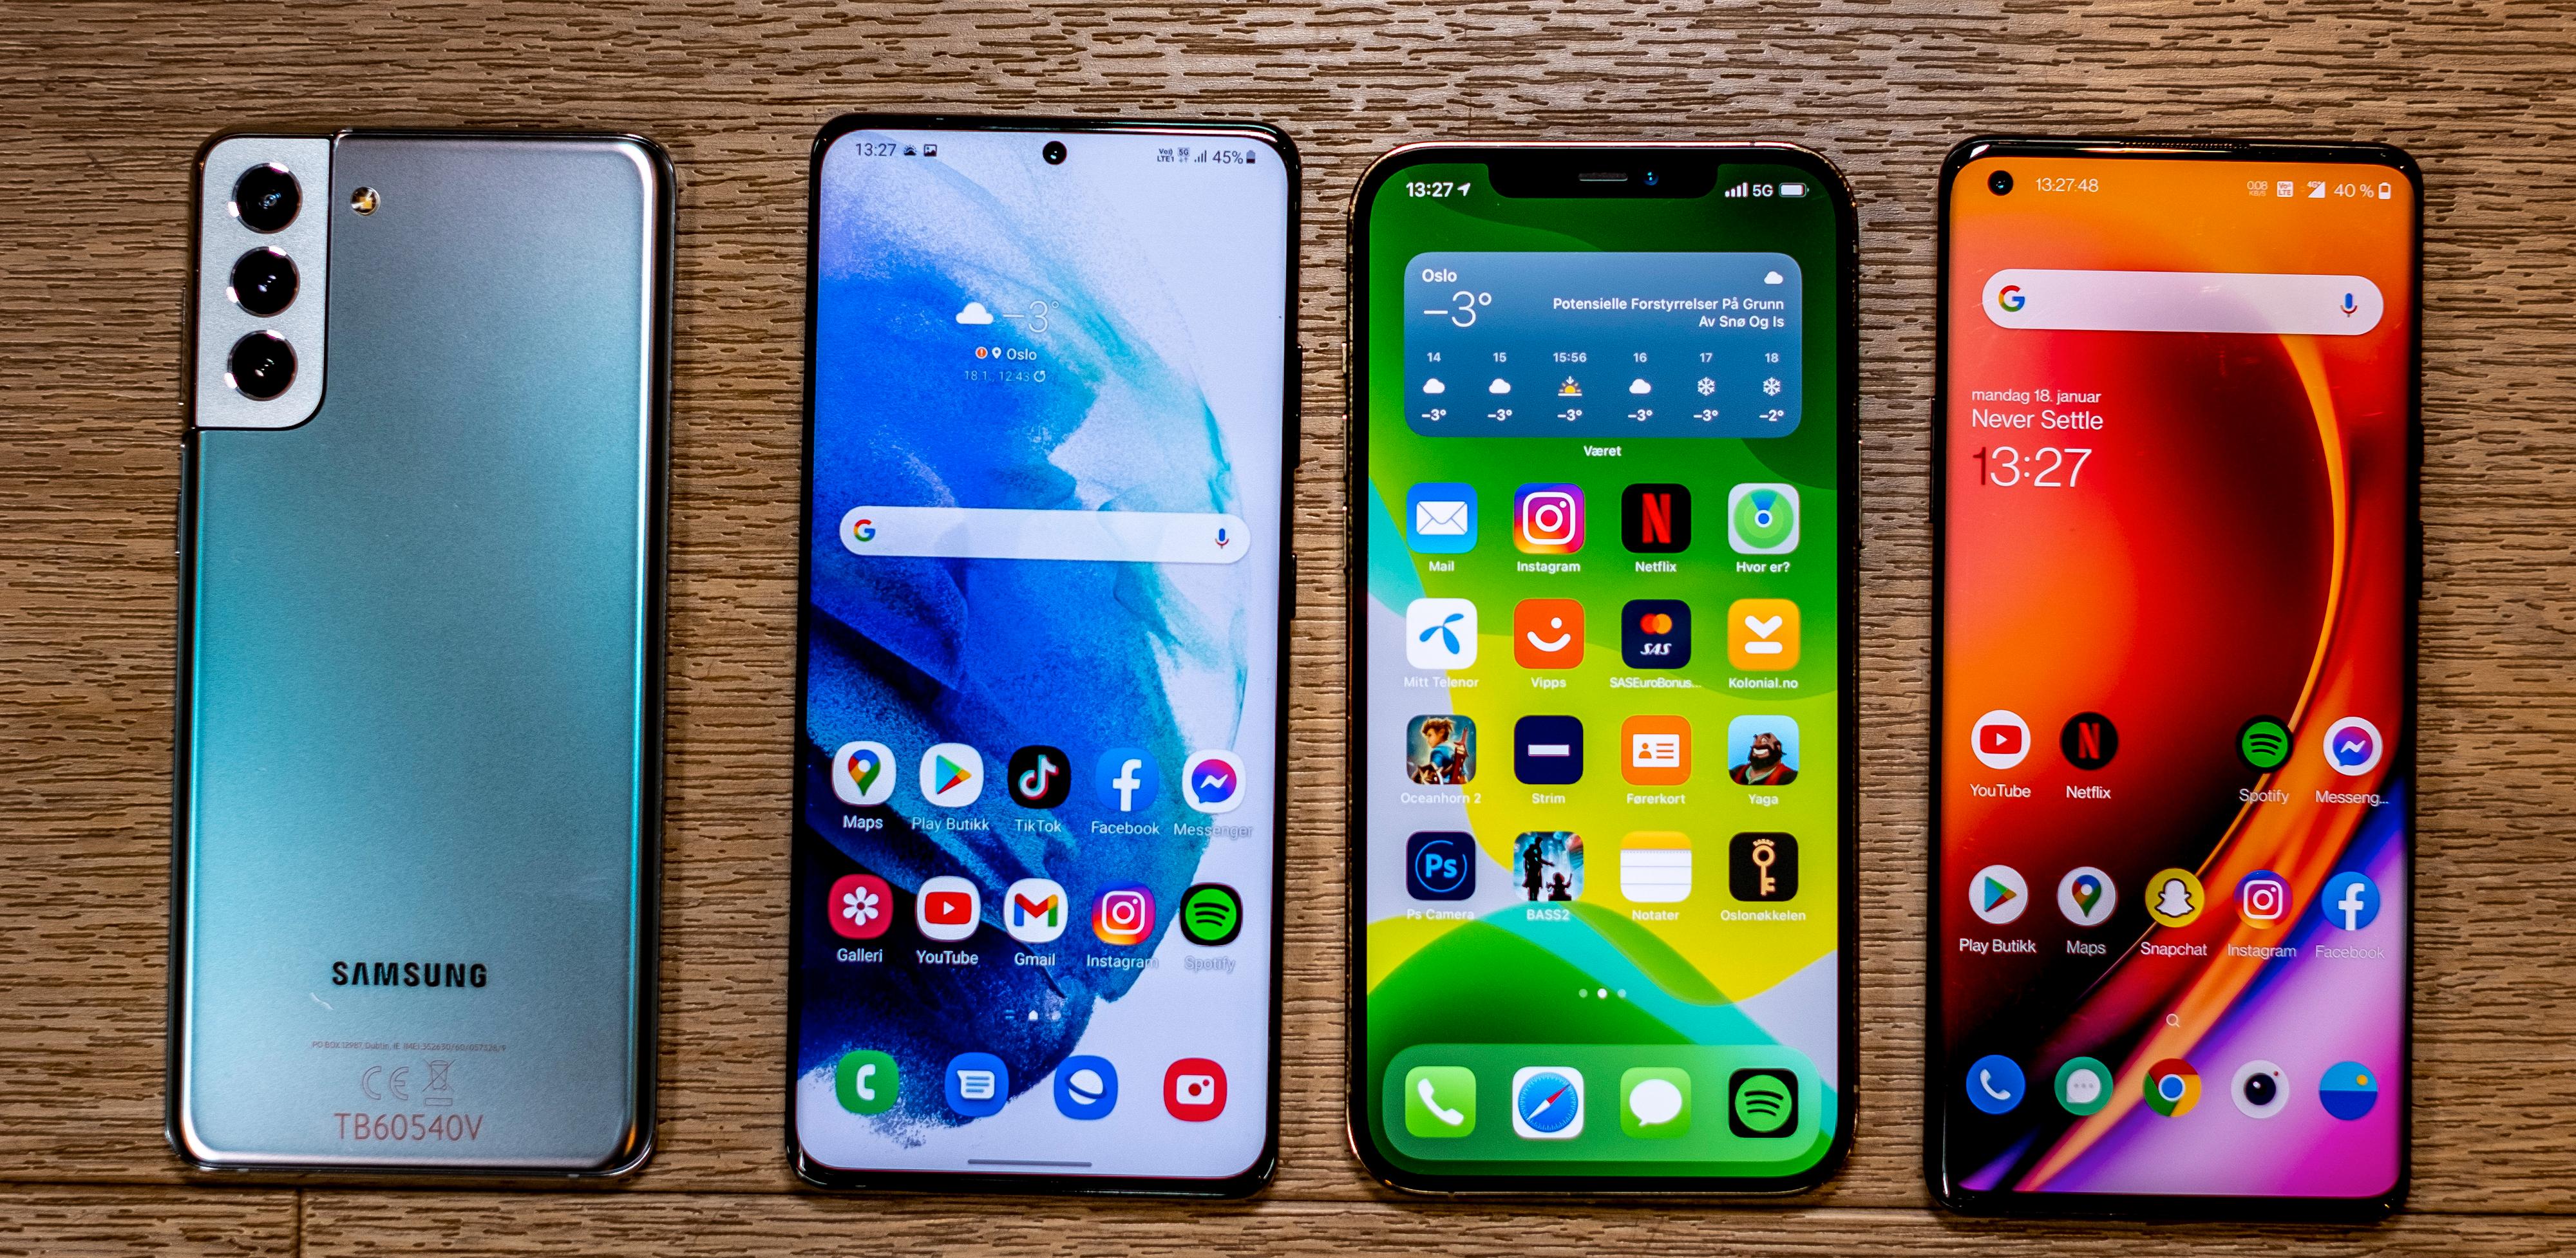 Fra venstre: Galaxy S21+, Galaxy S21 Ultra, iPhone 12 Pro Max, OnePlus 8 Pro.